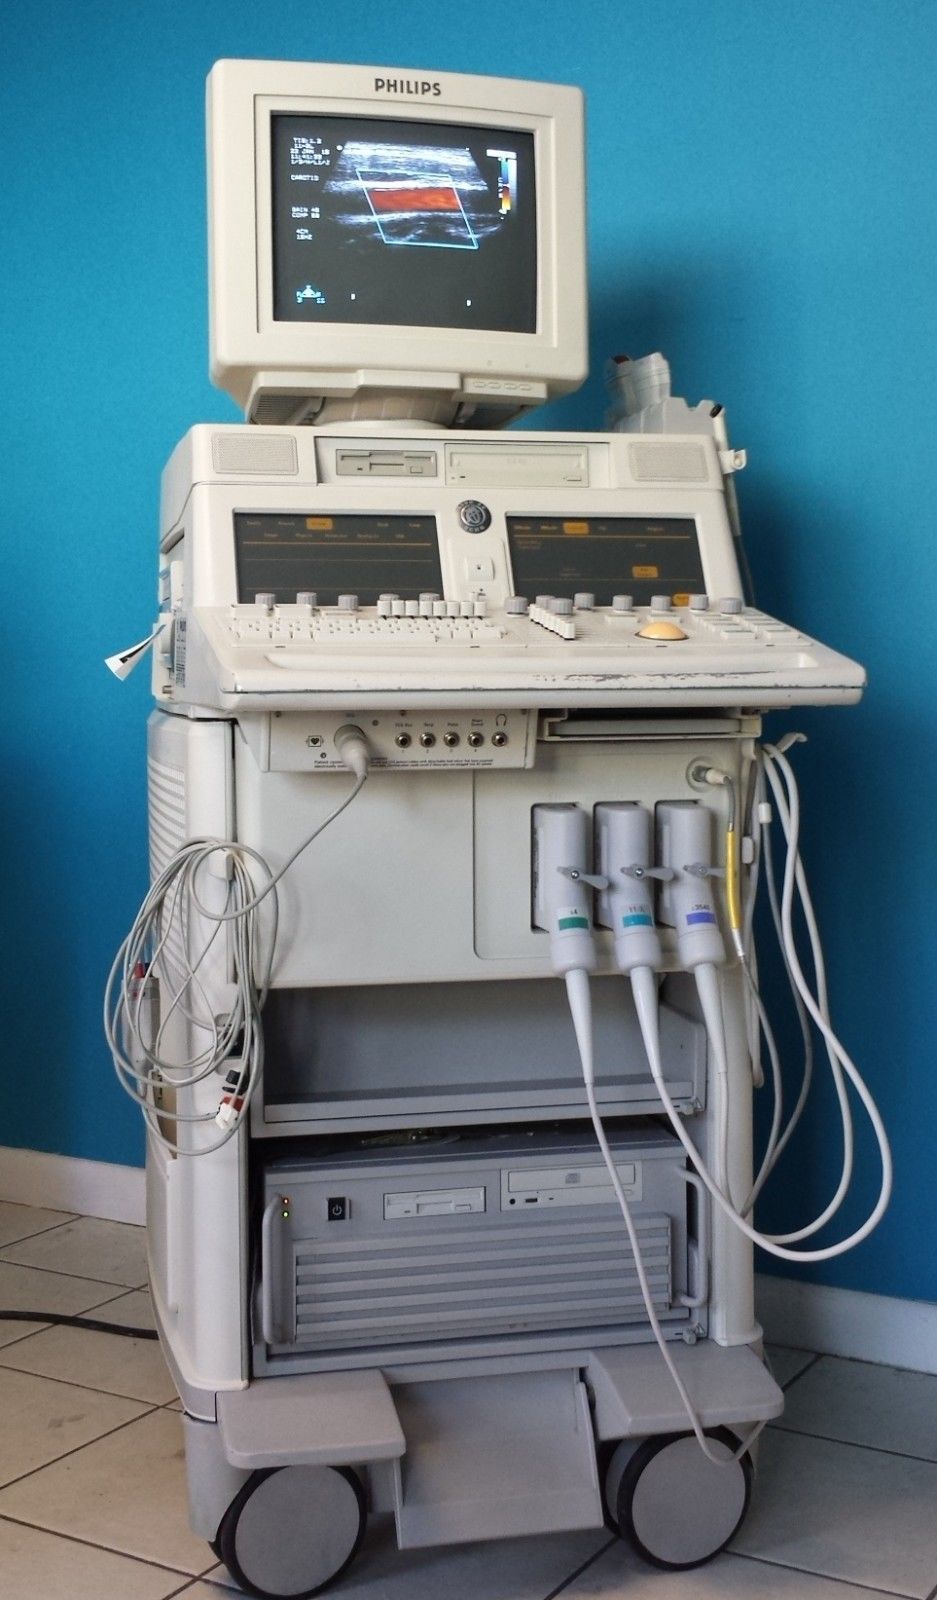 a medical machine sitting on top of a tiled floor